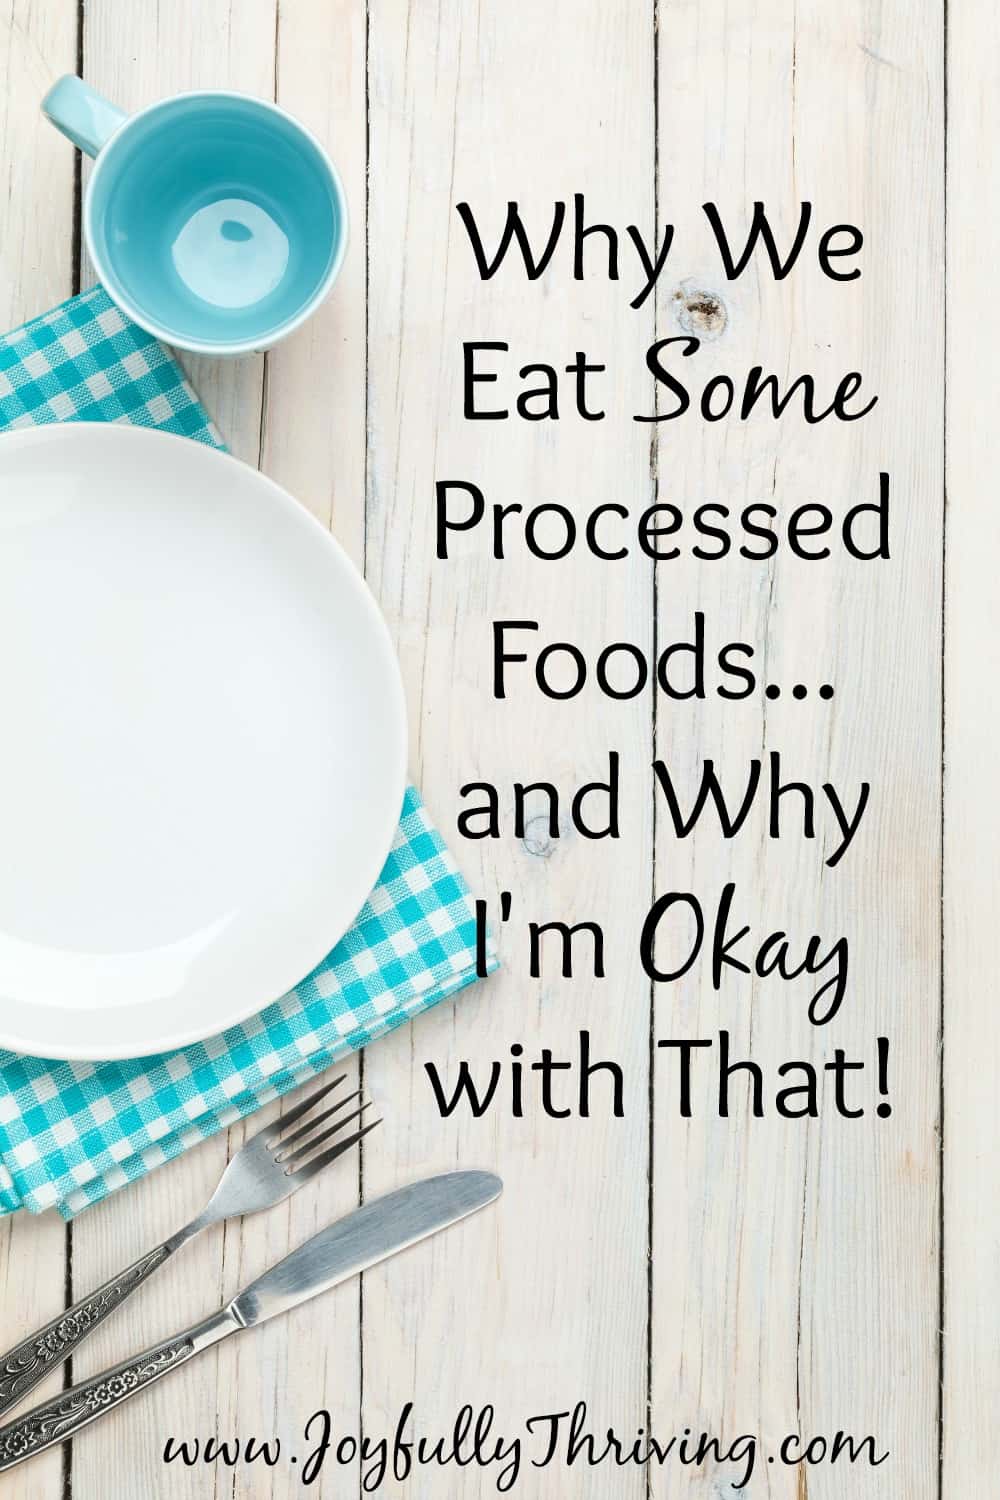 Why We Eat Some Processed Foods & Why I'm Okay with That - I know some moms cook everything from scratch but as much as I love to cook, this is real life. Here's our food approach.